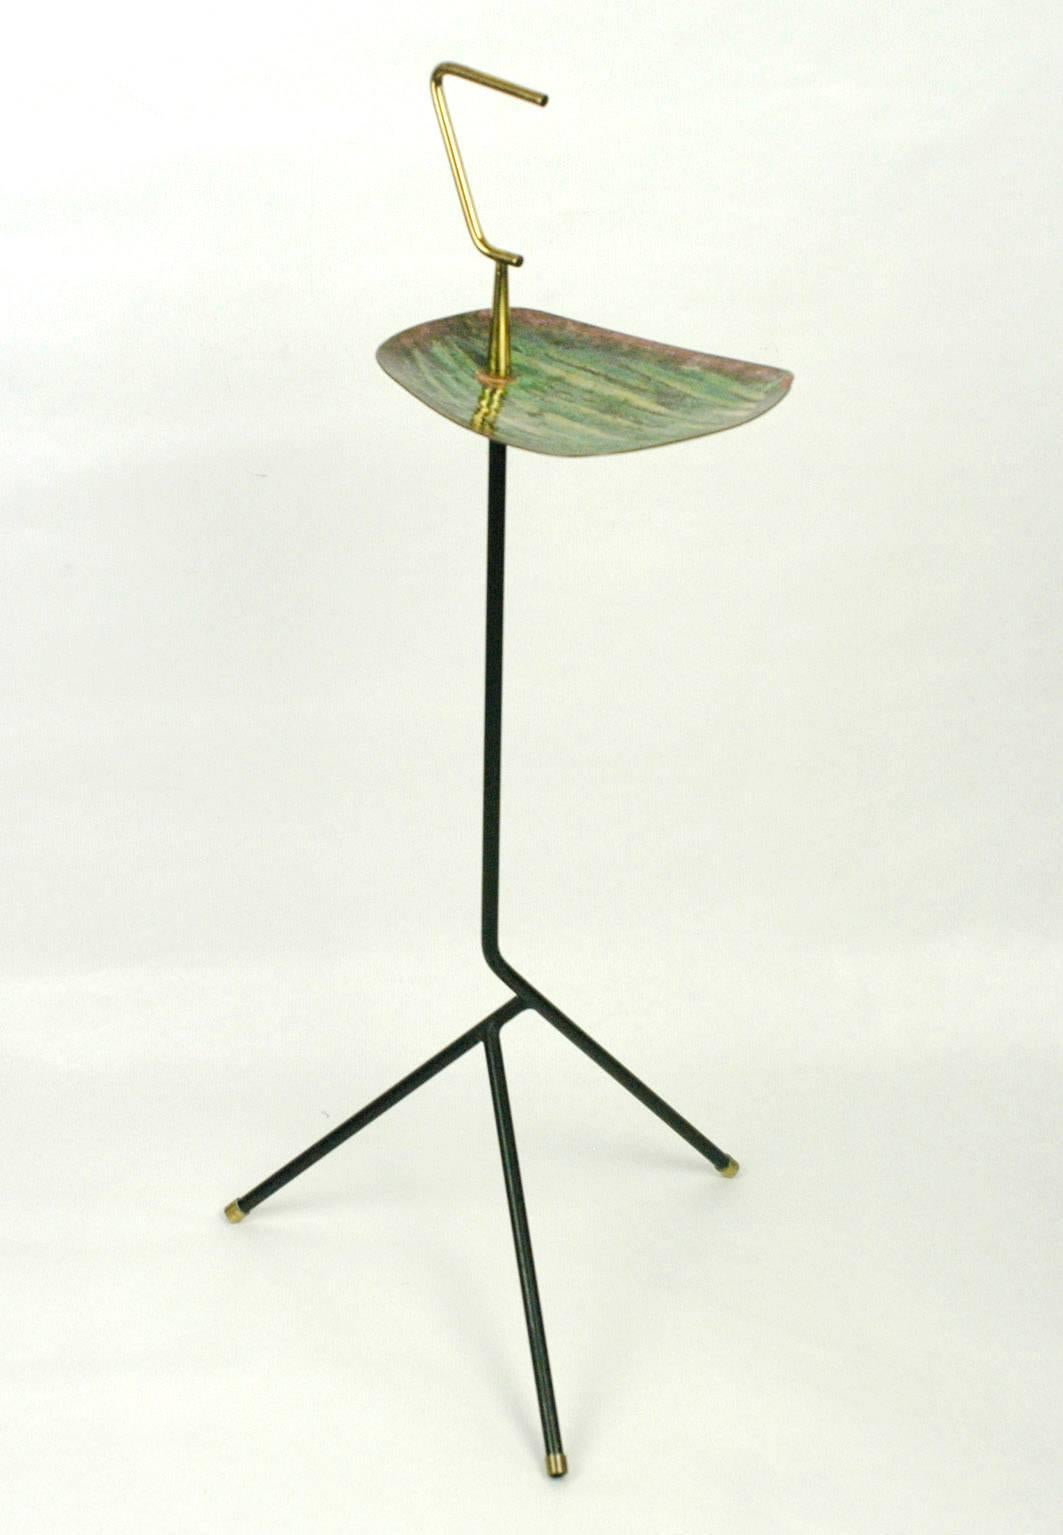 Elegant Italian 1950s tripod standing ashtray with enamelled tray and brass details.